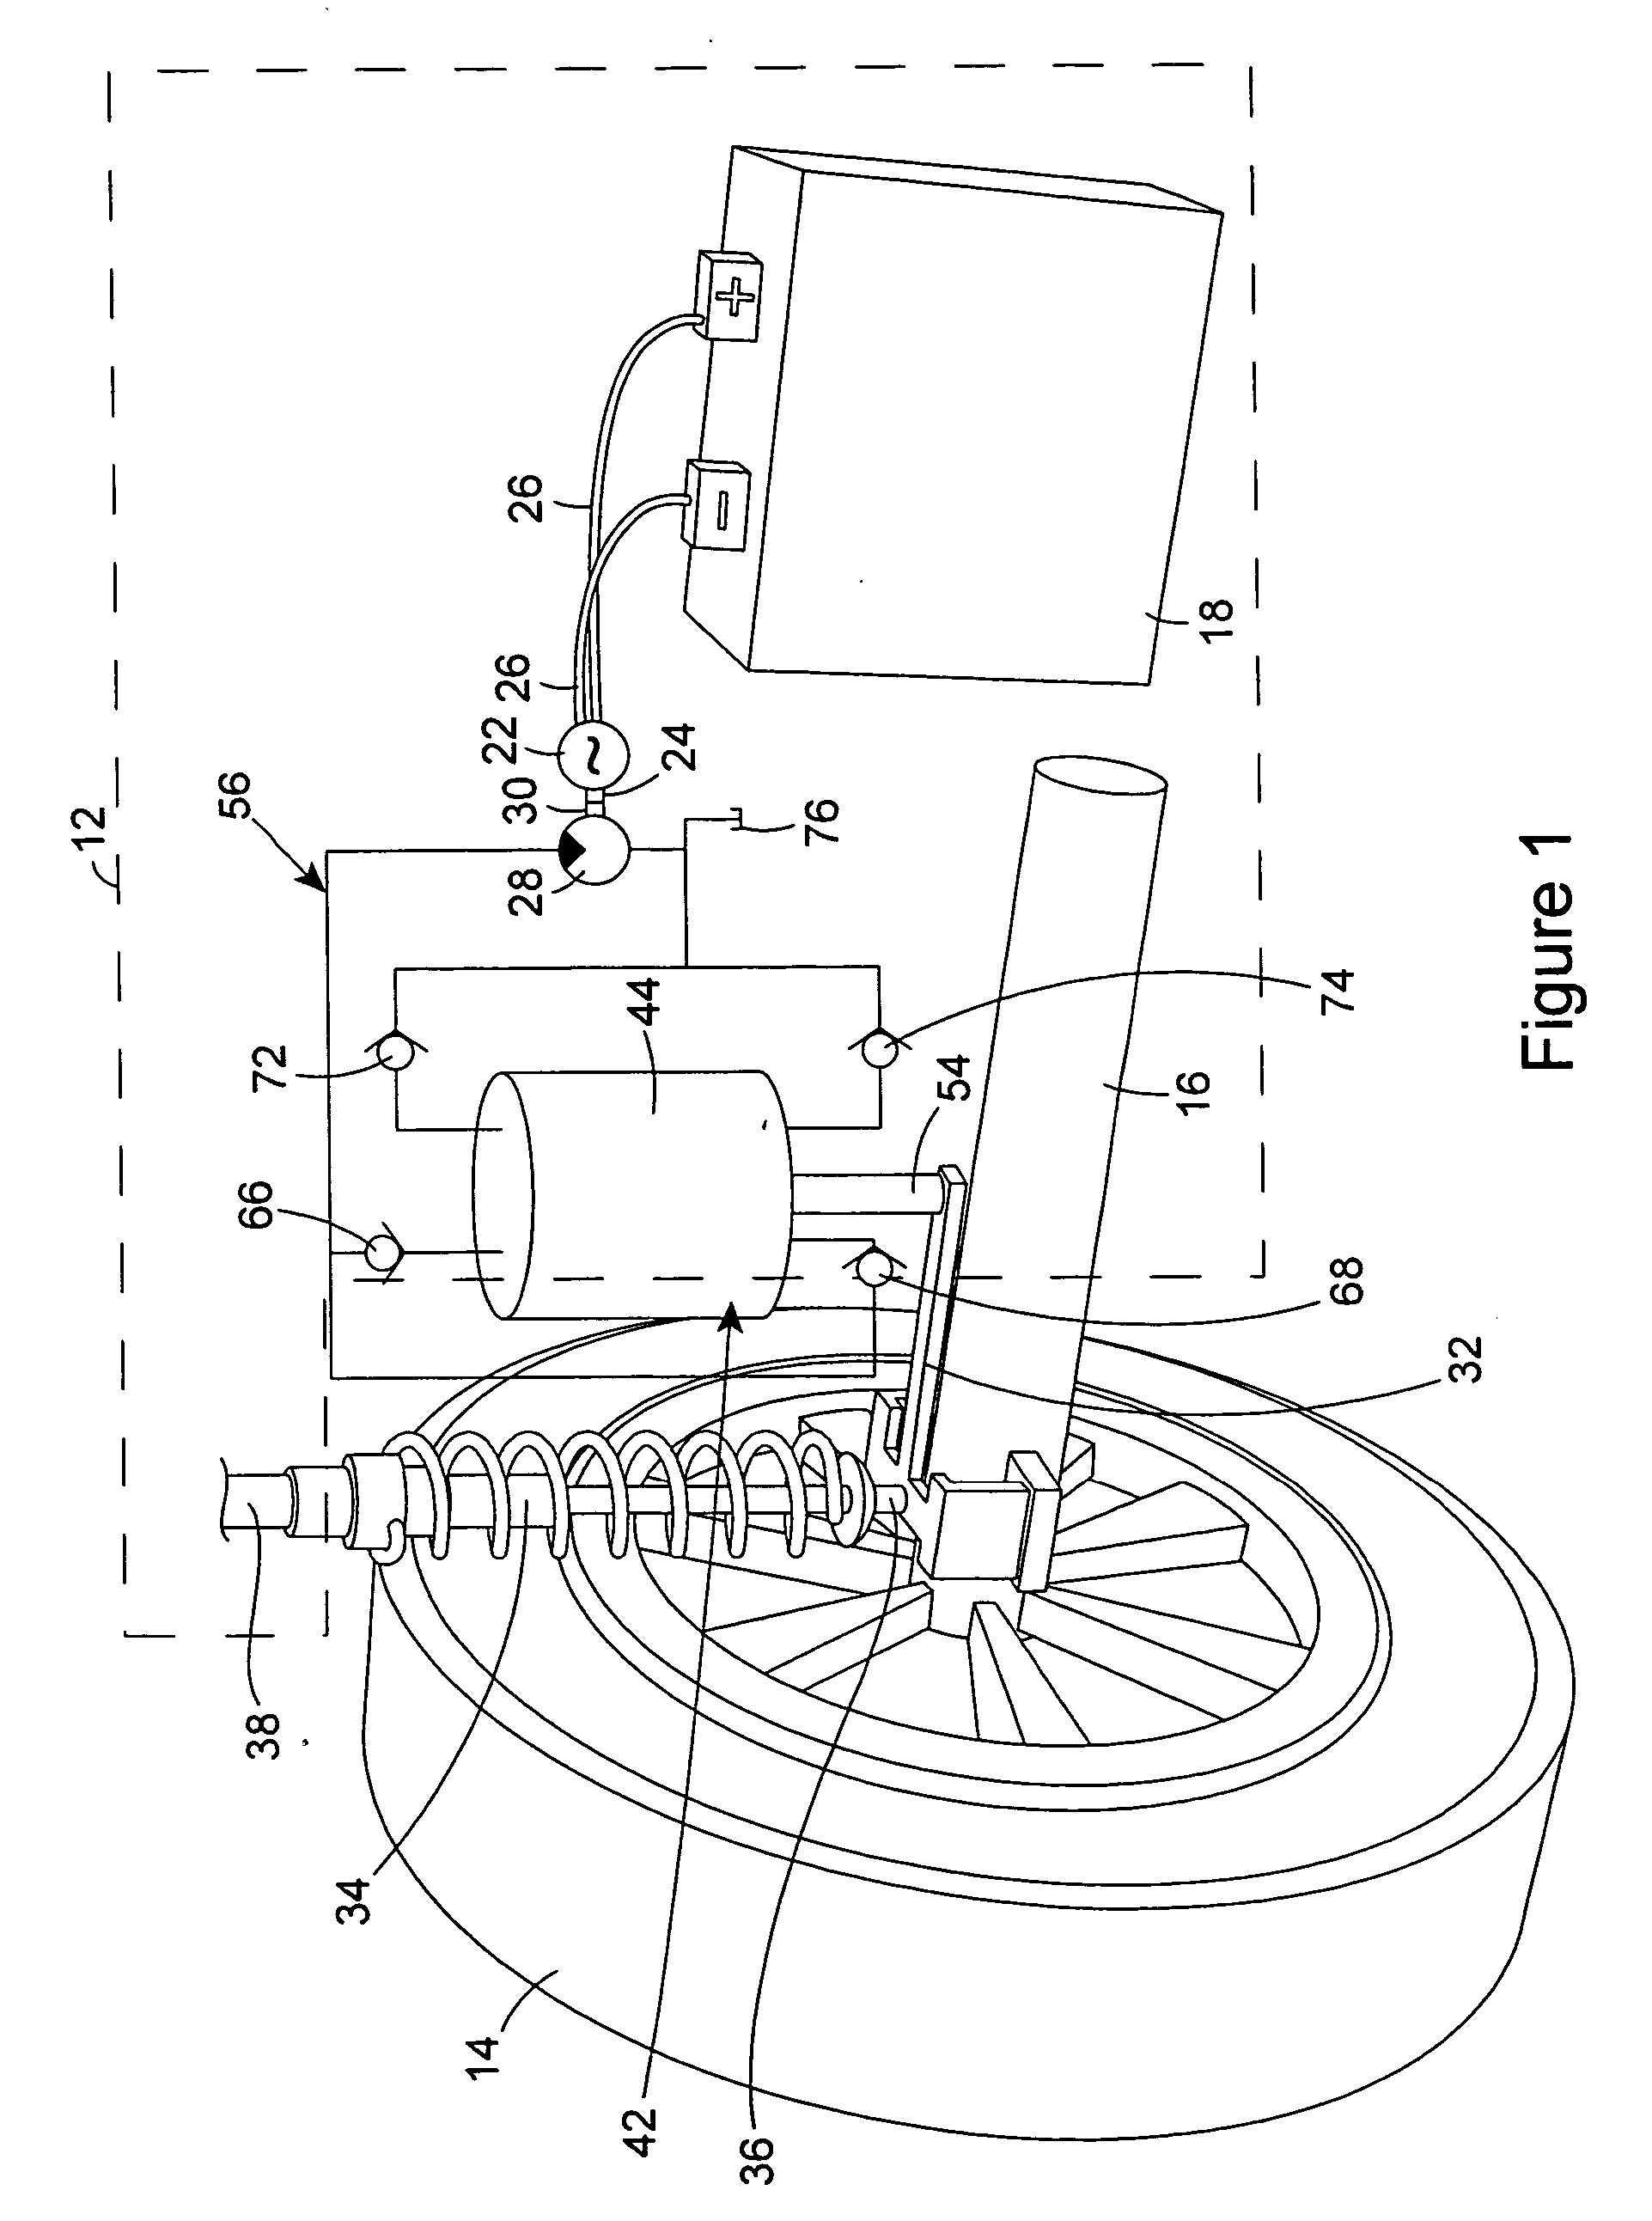 Apparatus and method for hydraulically converting movement of a vehicle wheel to electricity for charging a vehicle battery